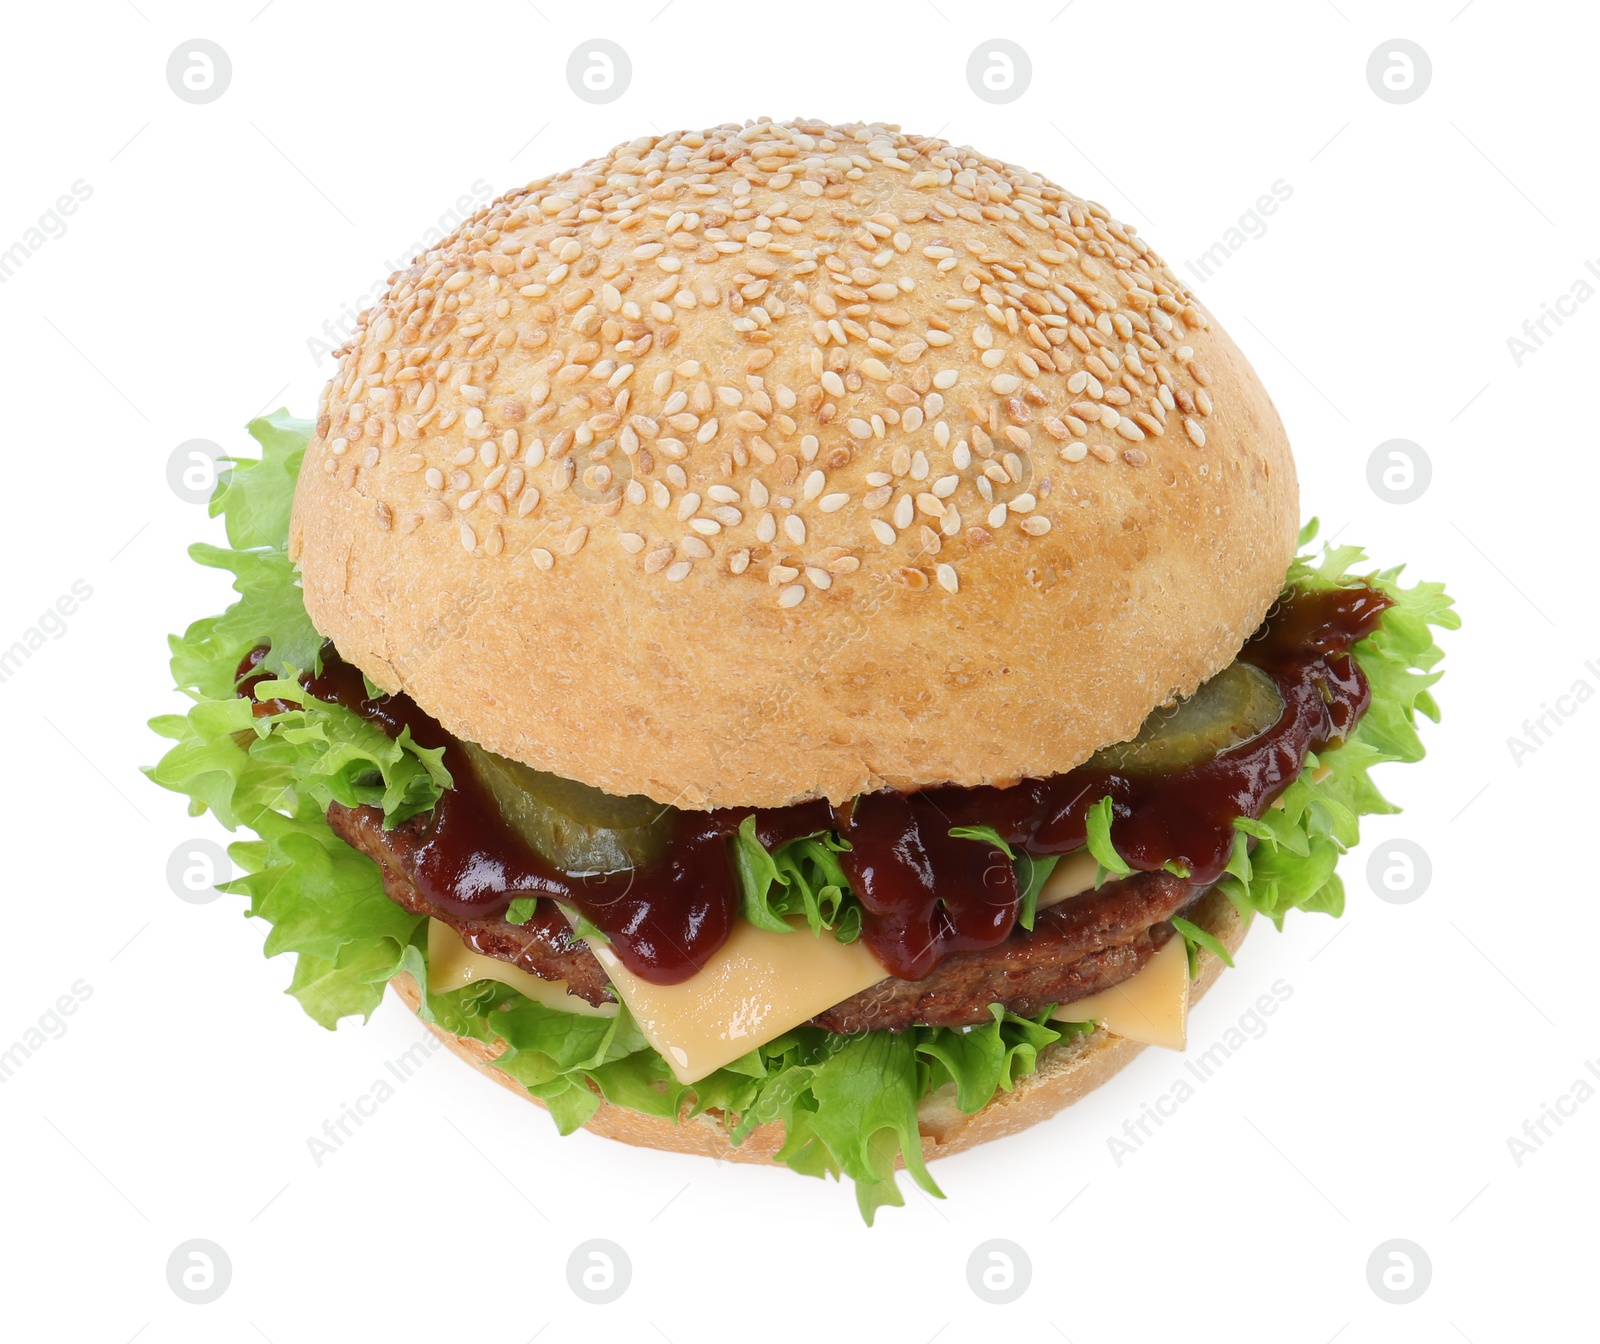 Photo of Delicious cheeseburger with lettuce, pickle, ketchup and patty isolated on white